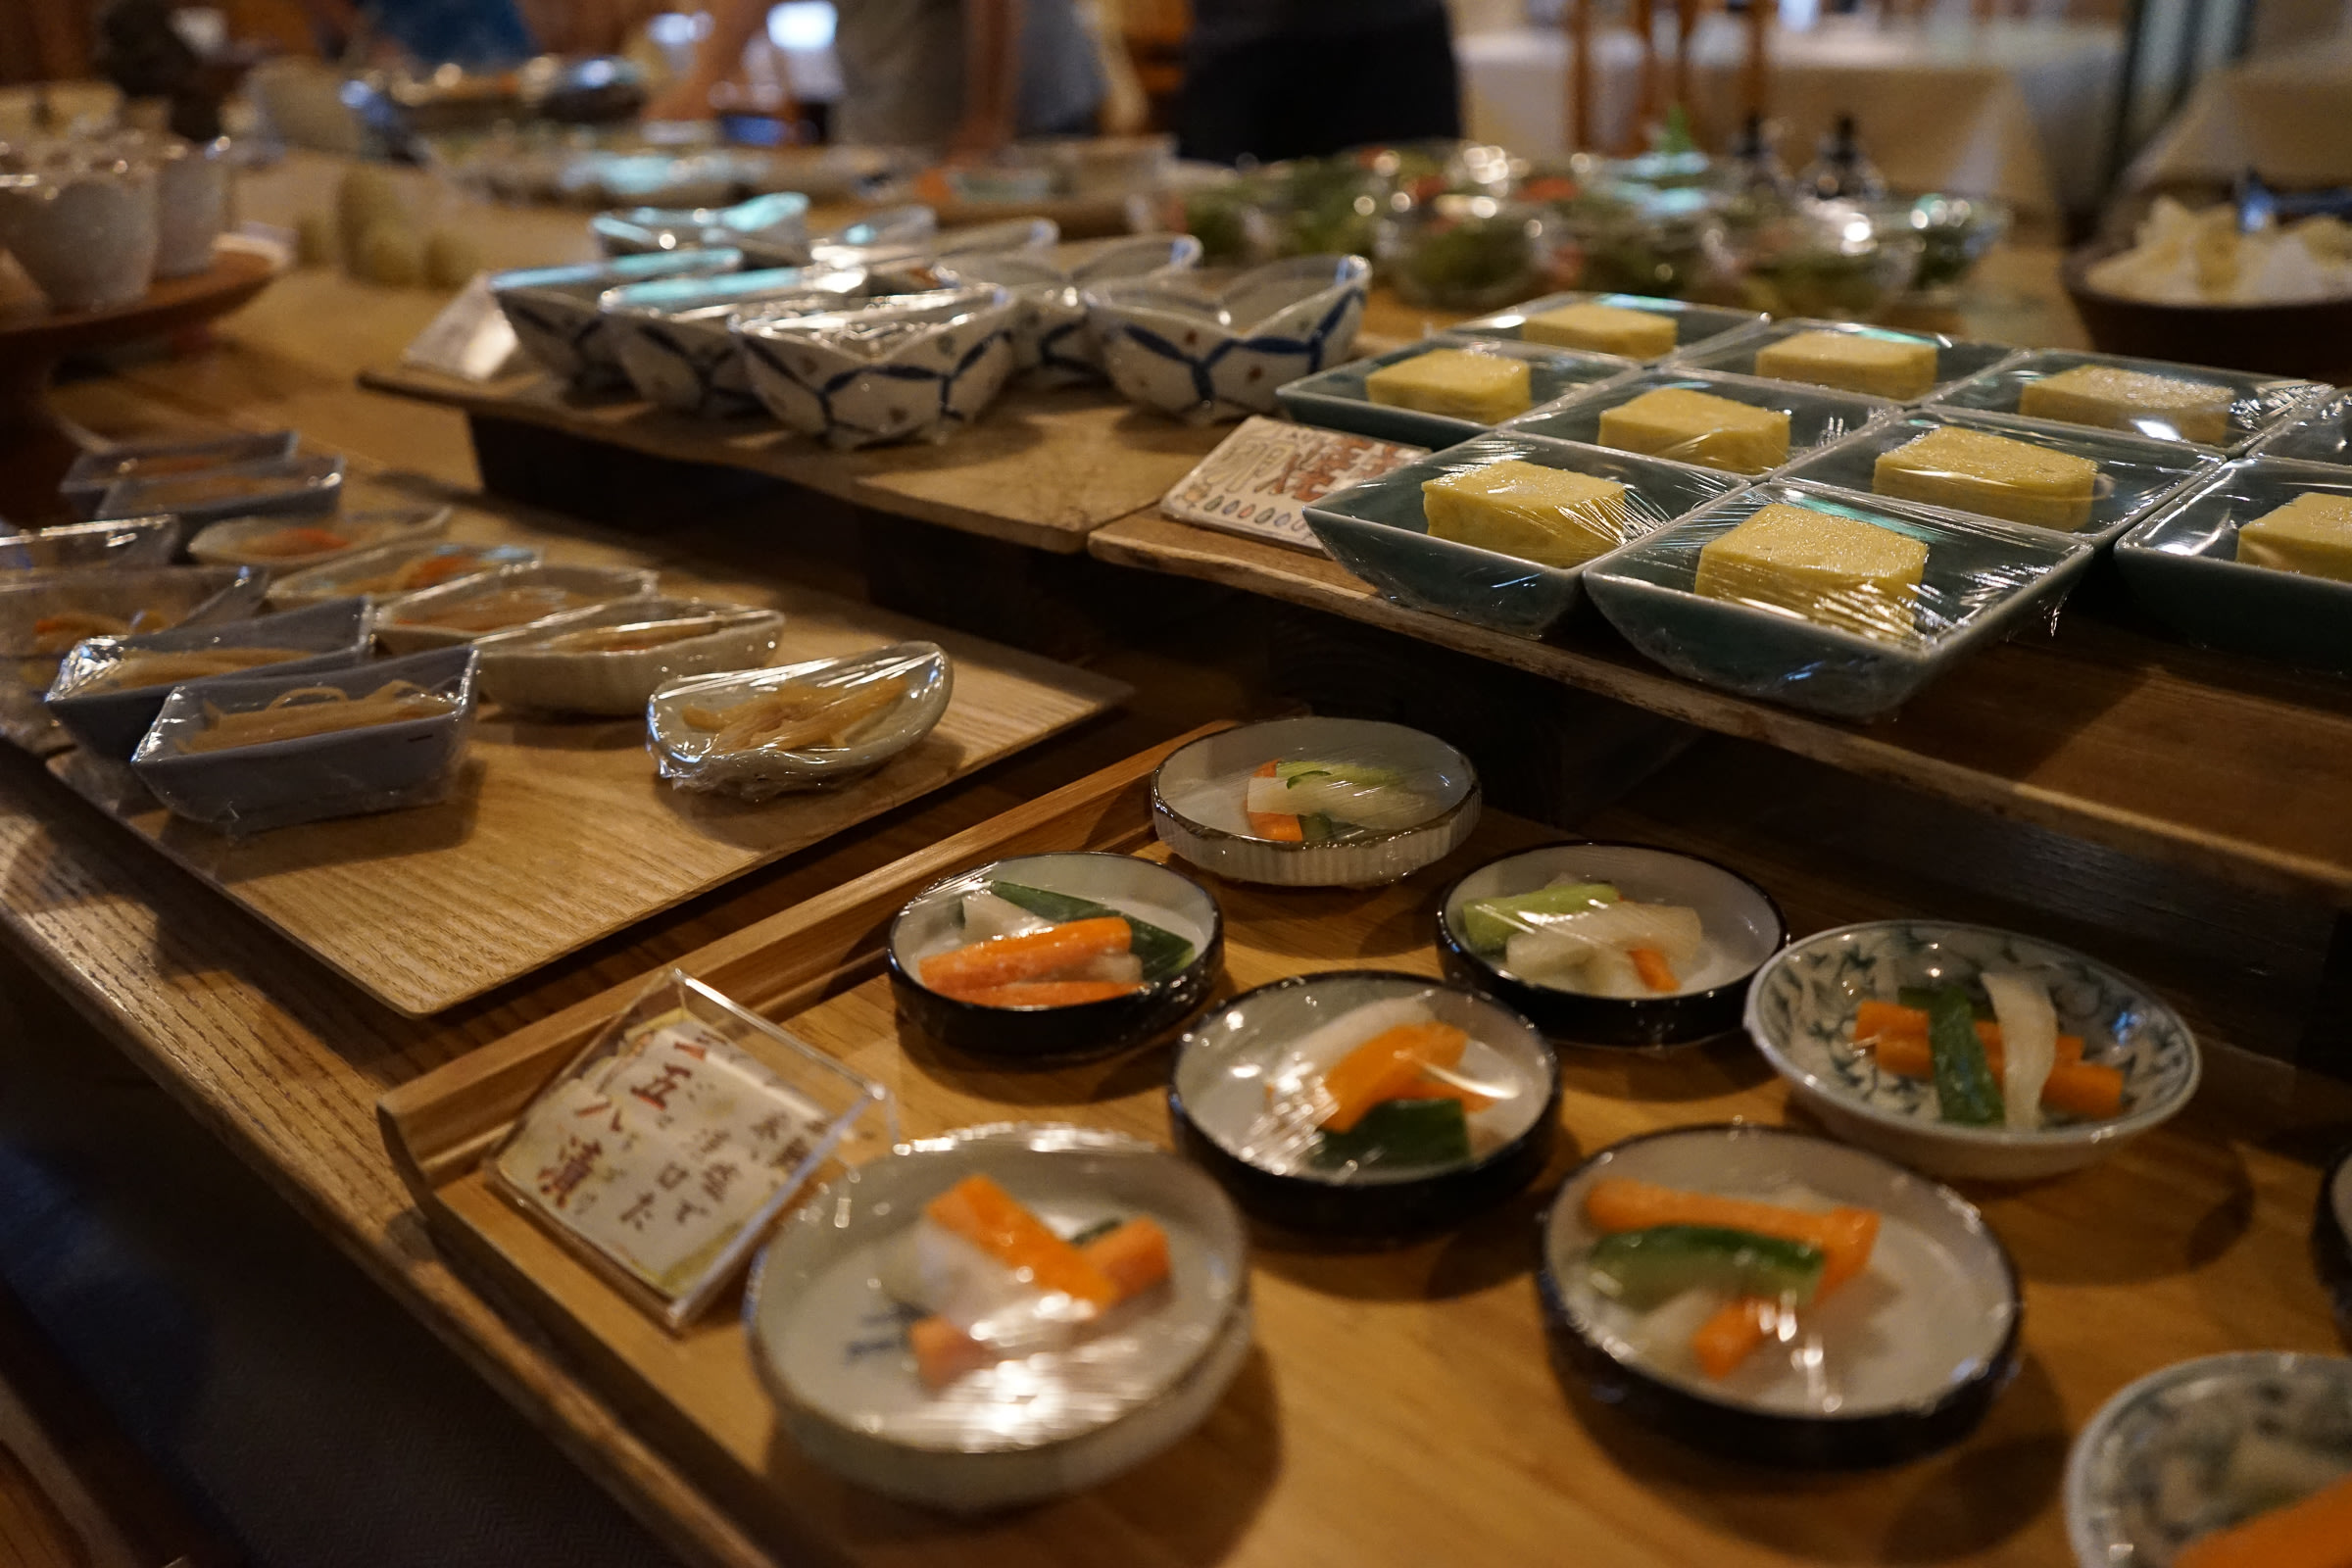 A buffet breakfast, with many small plates of food lined up on trays and tables.